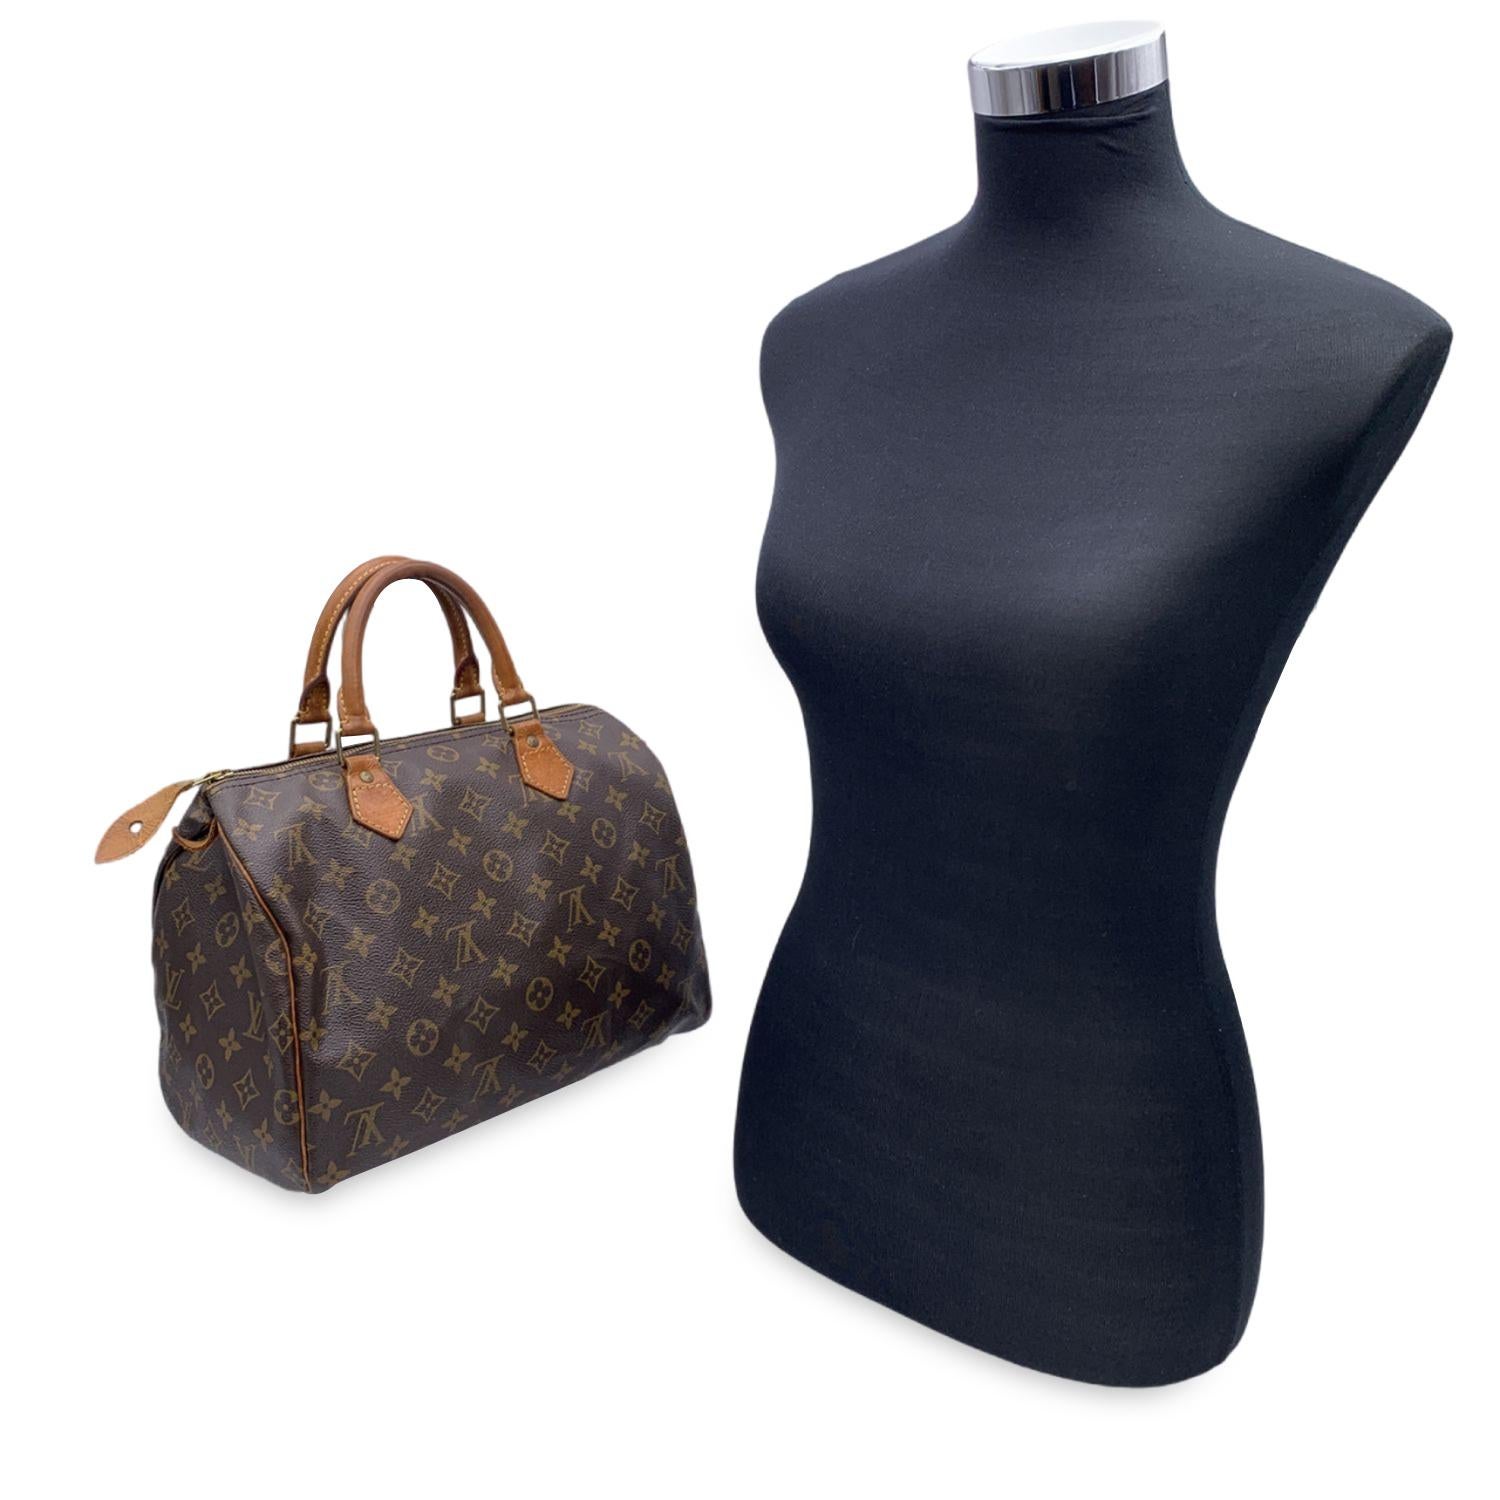 This classic Louis Vuitton SPEEDY 30, one of the most popular lines in the LV monogram. Rounded shape with double leather handles. Brown monogram canvas. Gold metal hardware. Upper zipper closure. Brown canvas lining. 1 open pocket inside. 'LOUIS